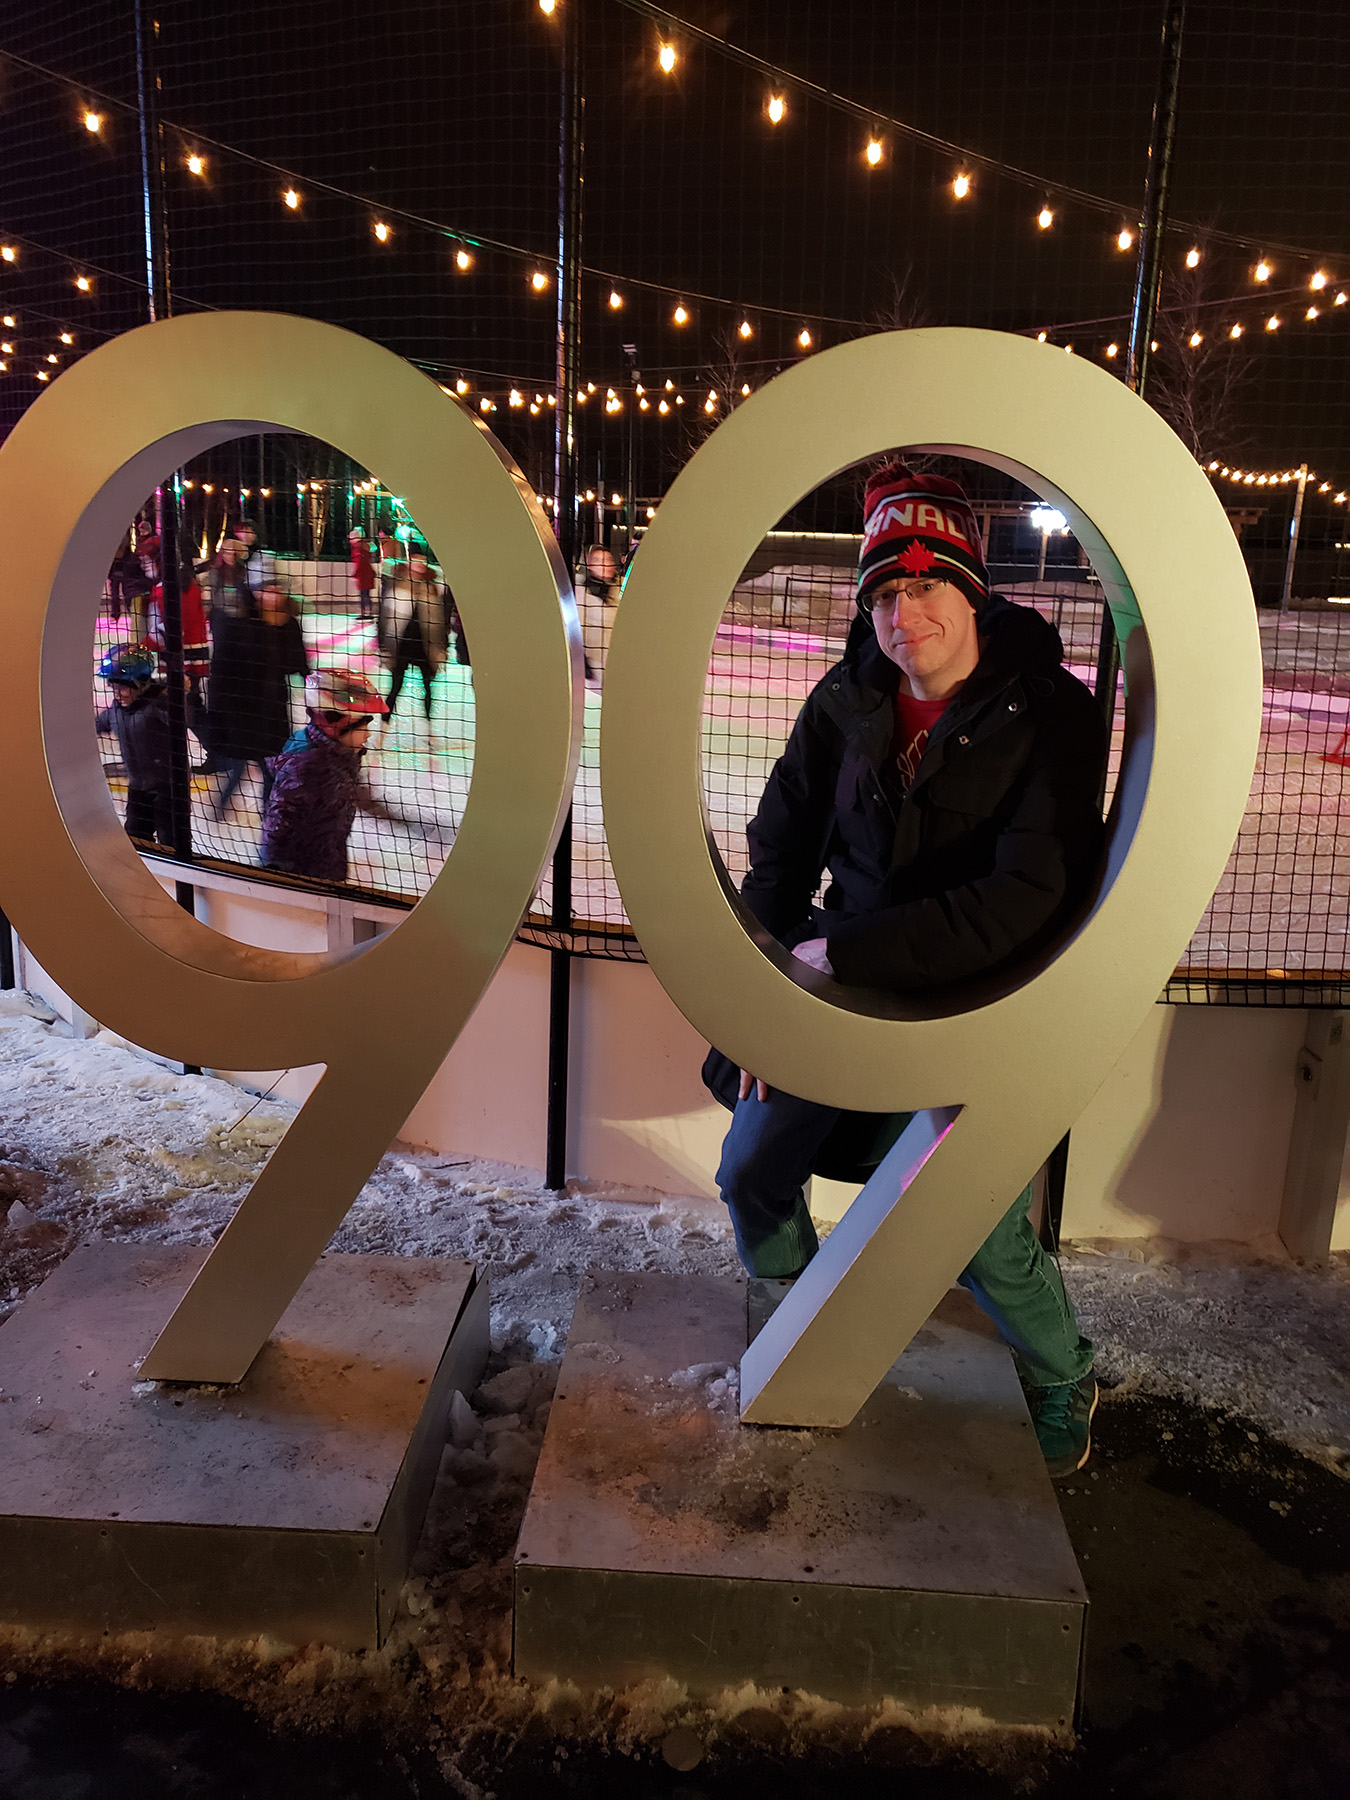 A blond man standing behind a large 99 in front of a skating rink.